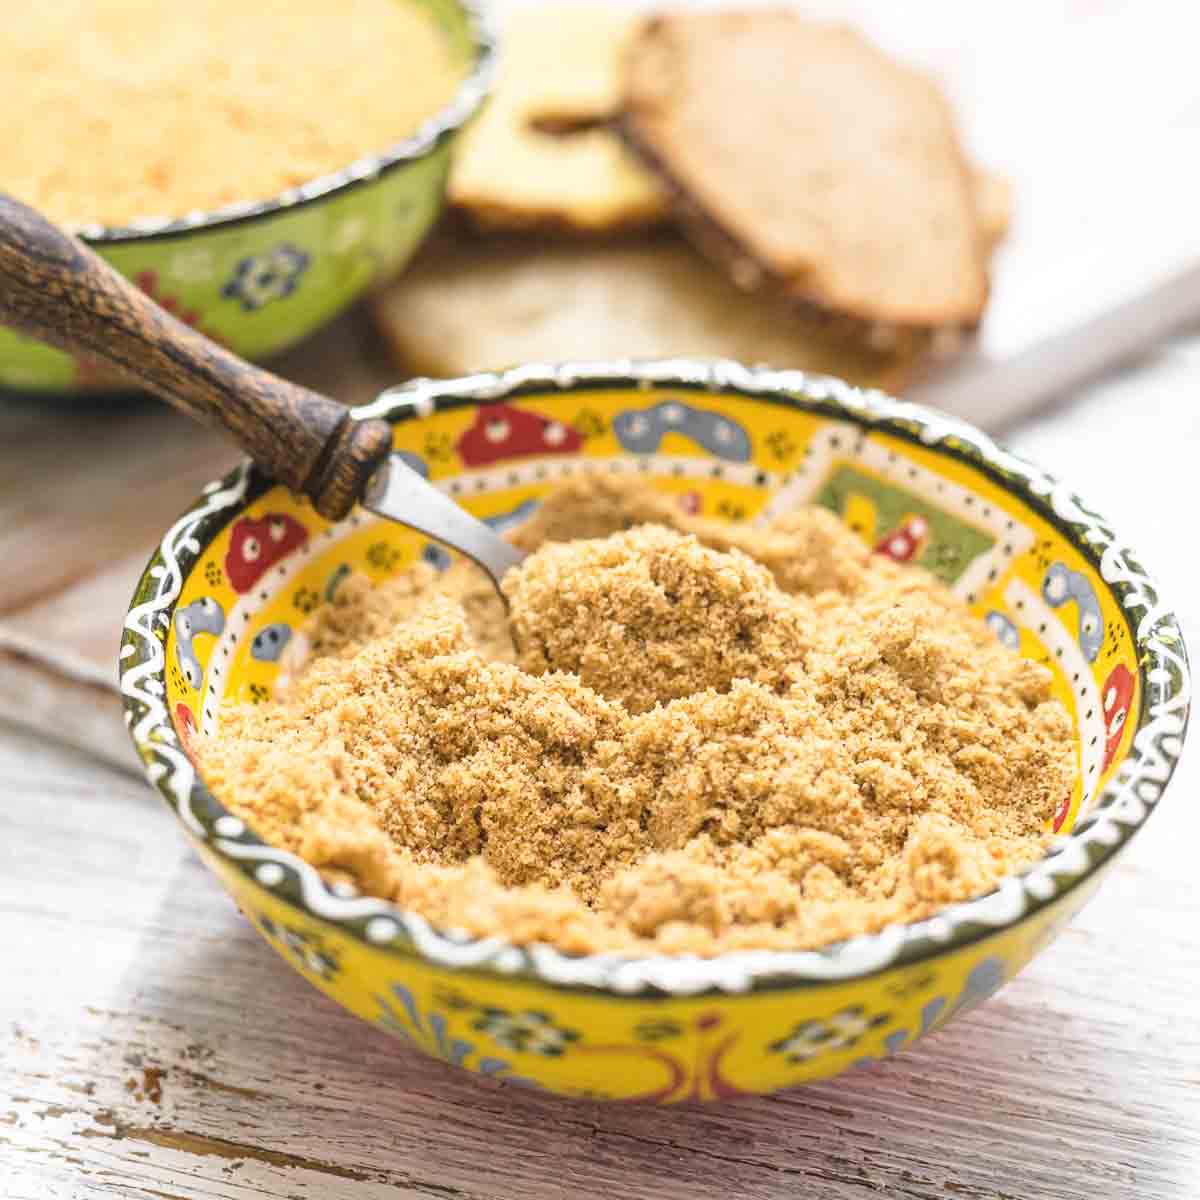 Keto Breadcrumbs in a yellow bowl with spoon.